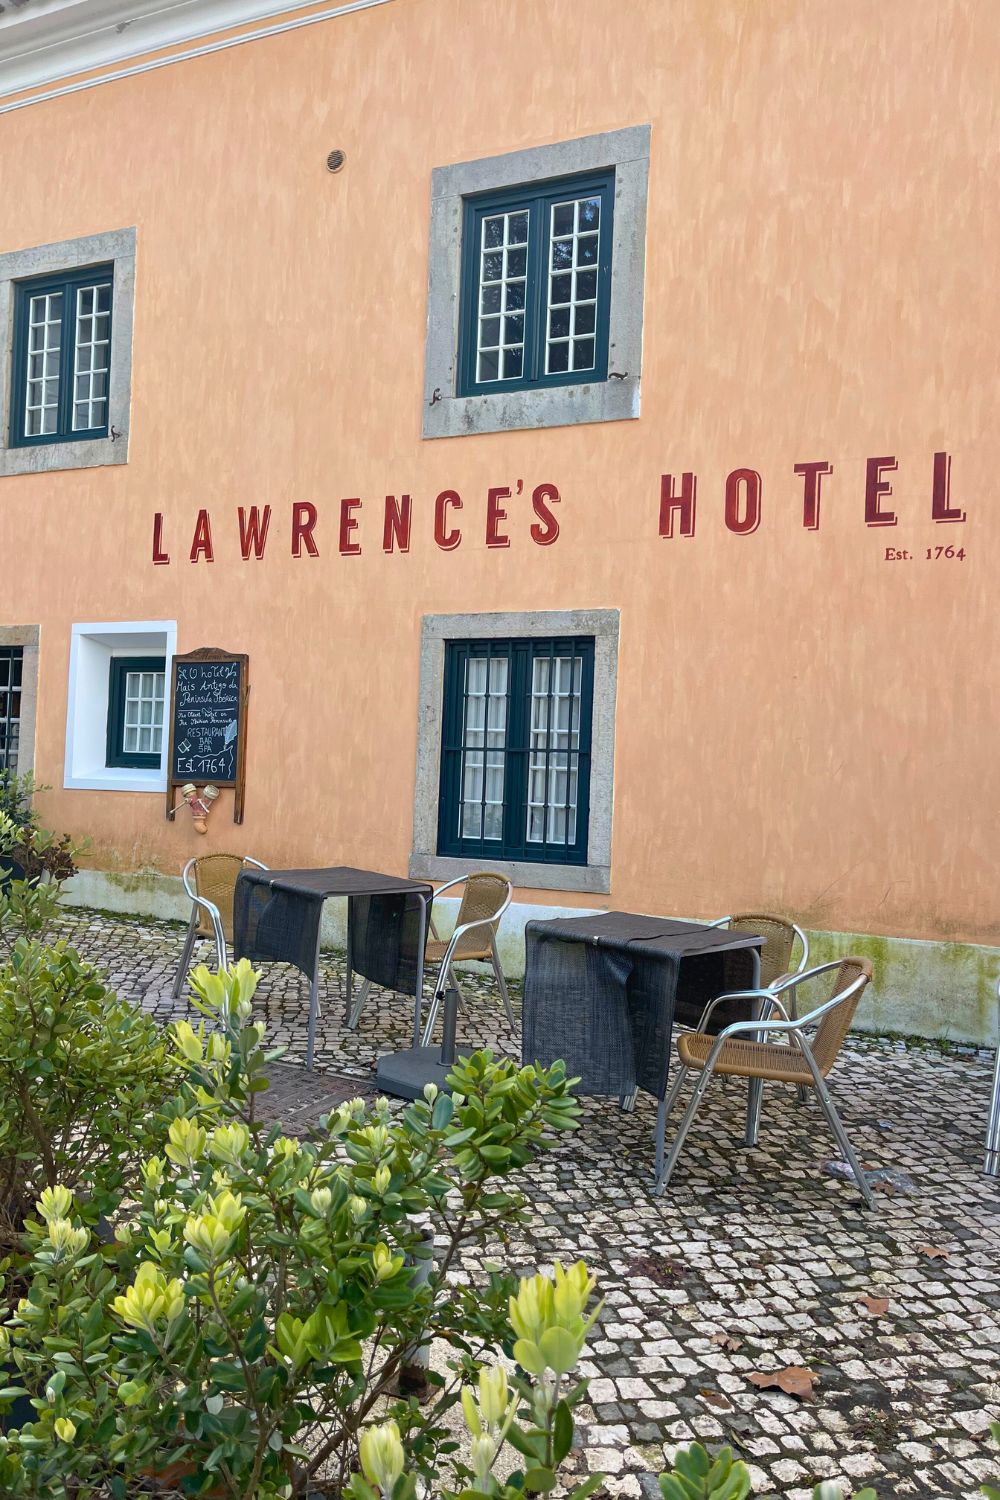 The peach-colored facade of Lawrence's Hotel with the name and 'Est. 1764' in red lettering, complemented by traditional grey-framed windows, and a blackboard displaying the hotel's history. A cobblestone courtyard with outdoor seating invites guests to relax outside this historical establishment.